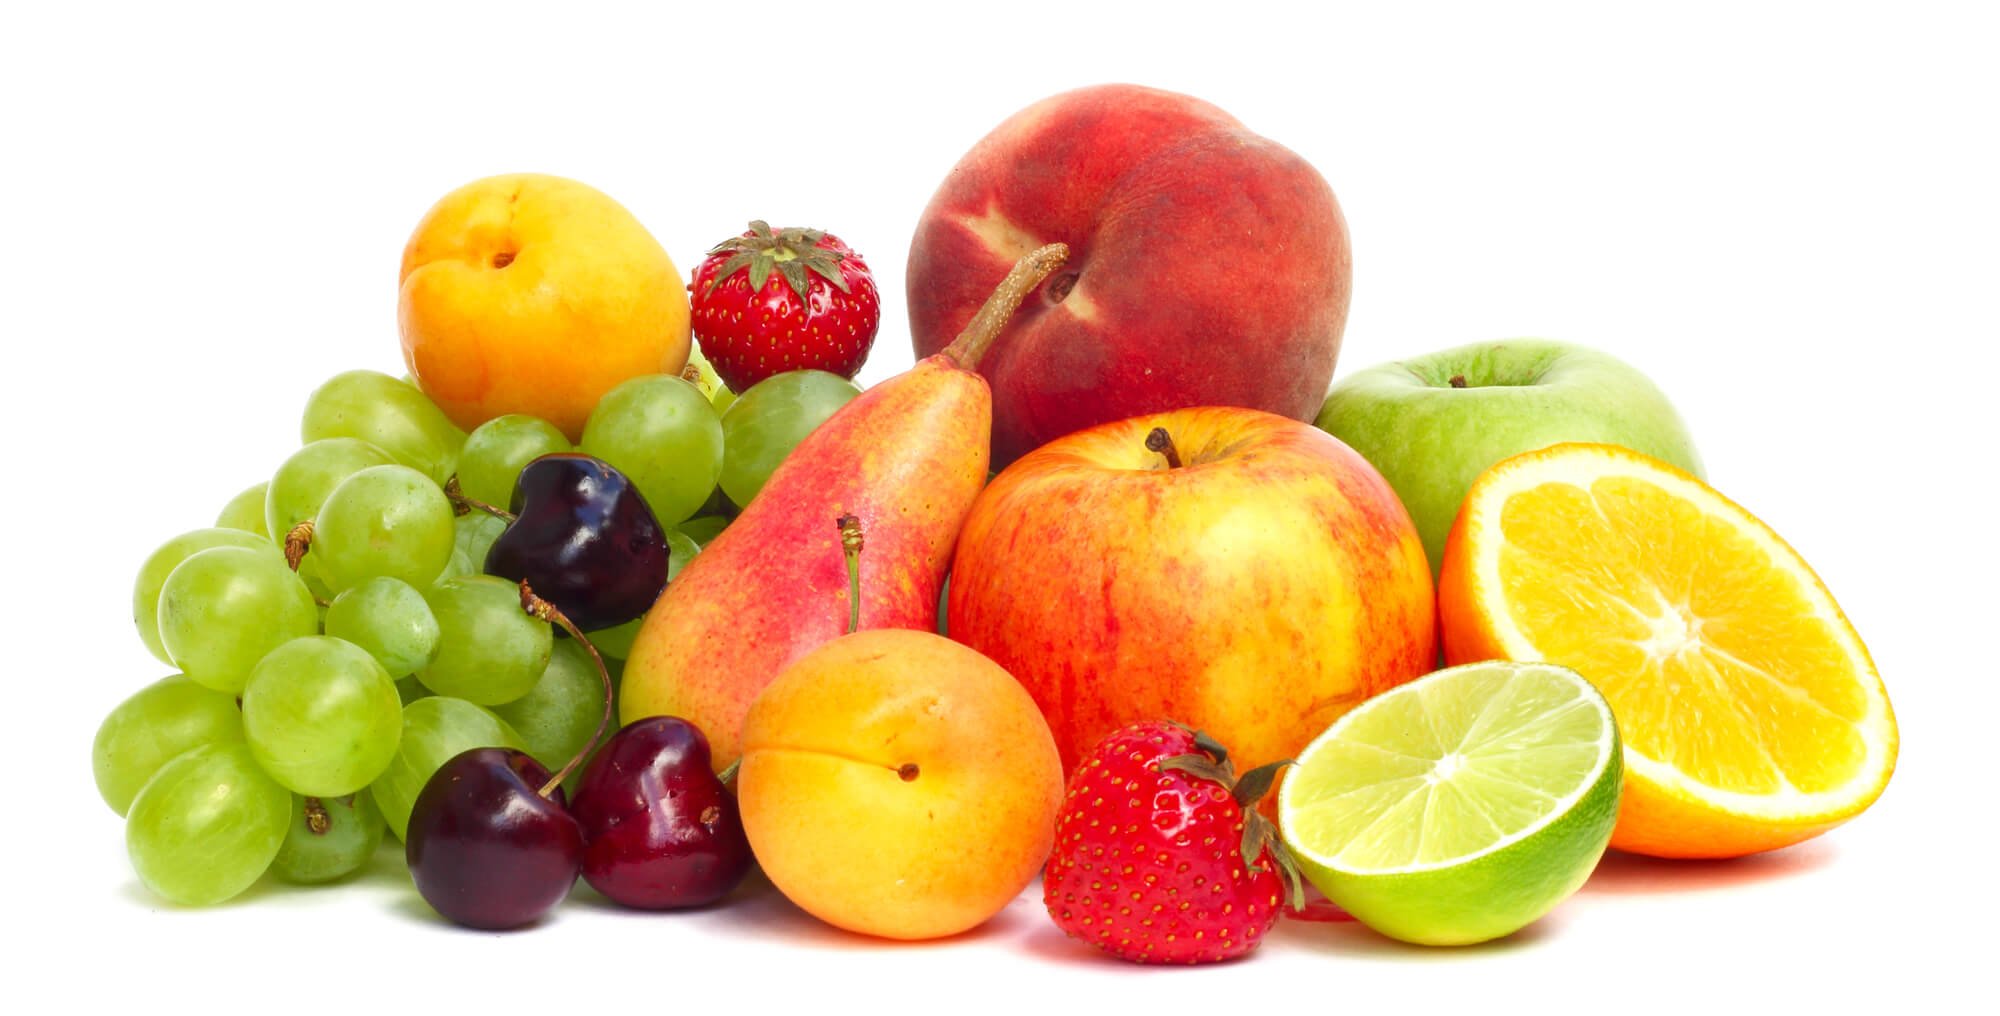 A pile of mixed fruit